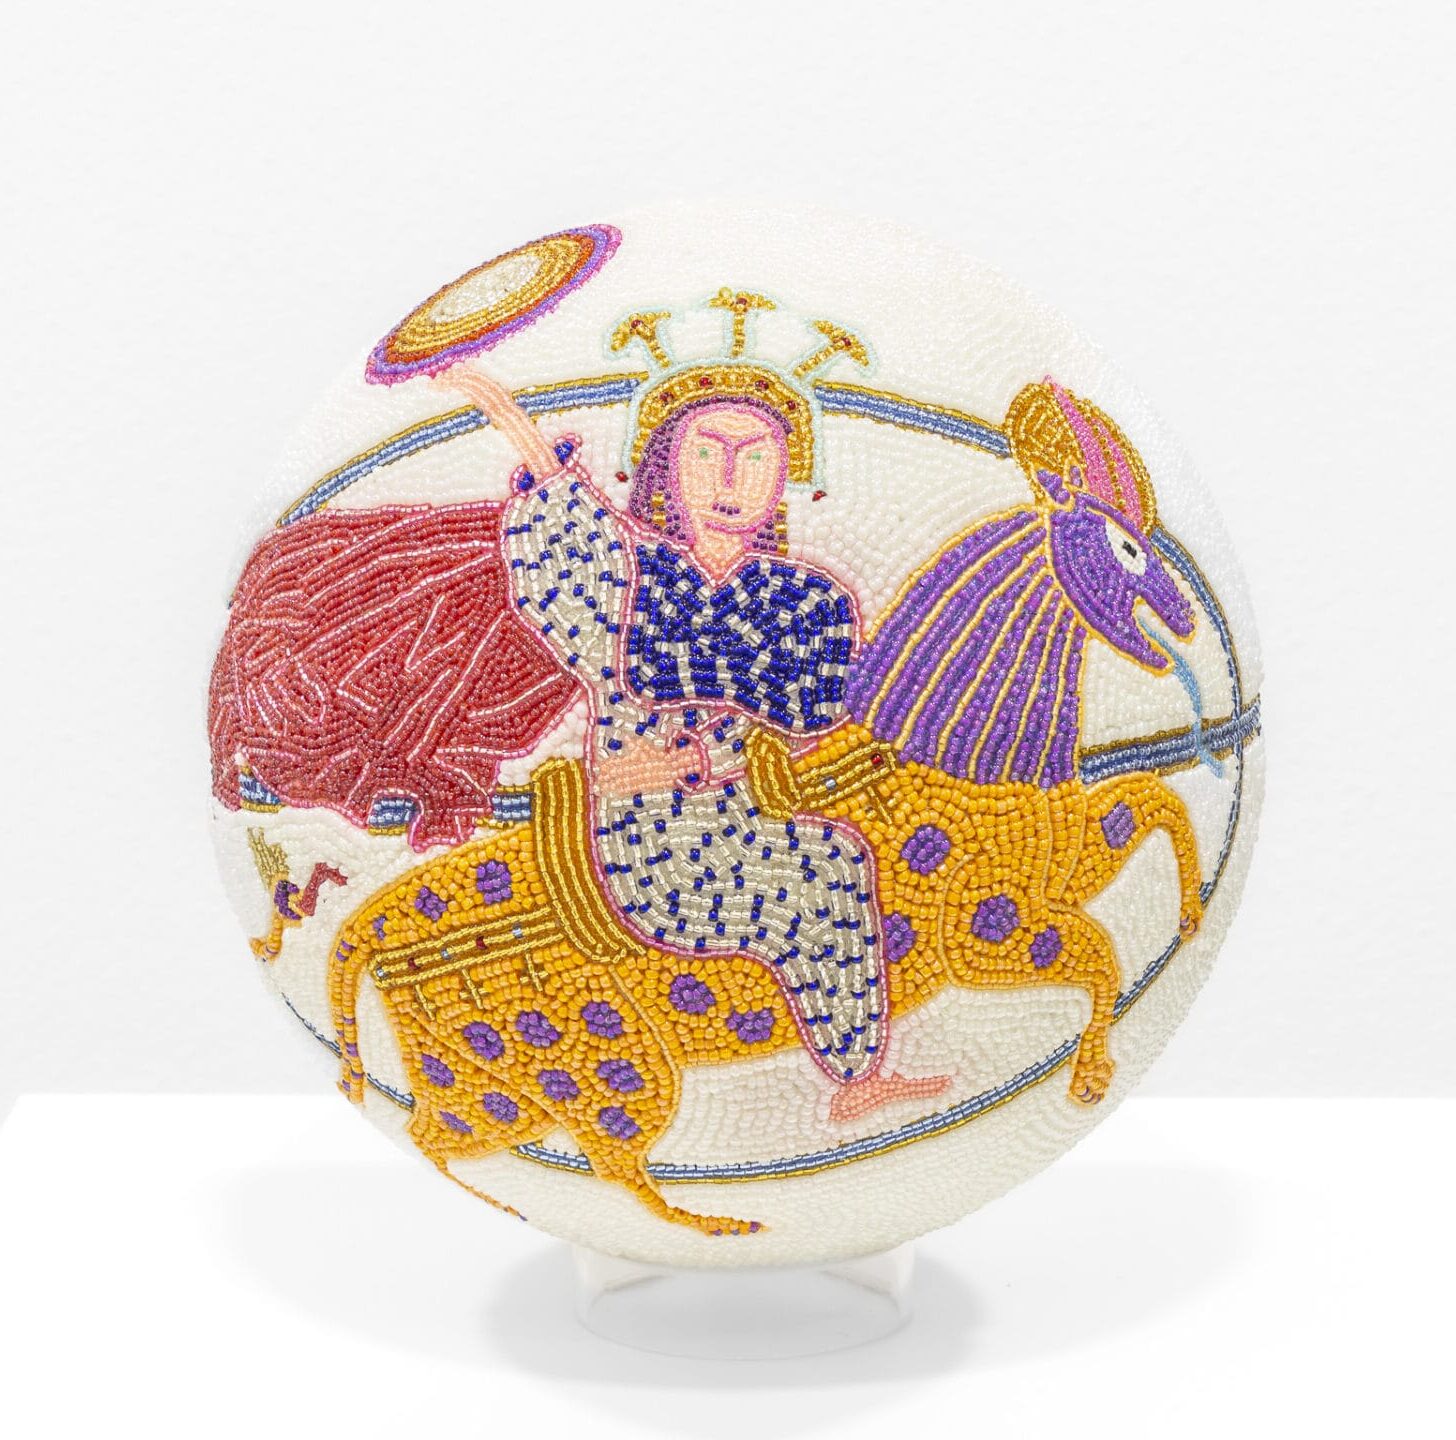 a glass bead-coated spherical sculpture made from a basketball depicting a woman on horseback, wearing a crown, on a white background